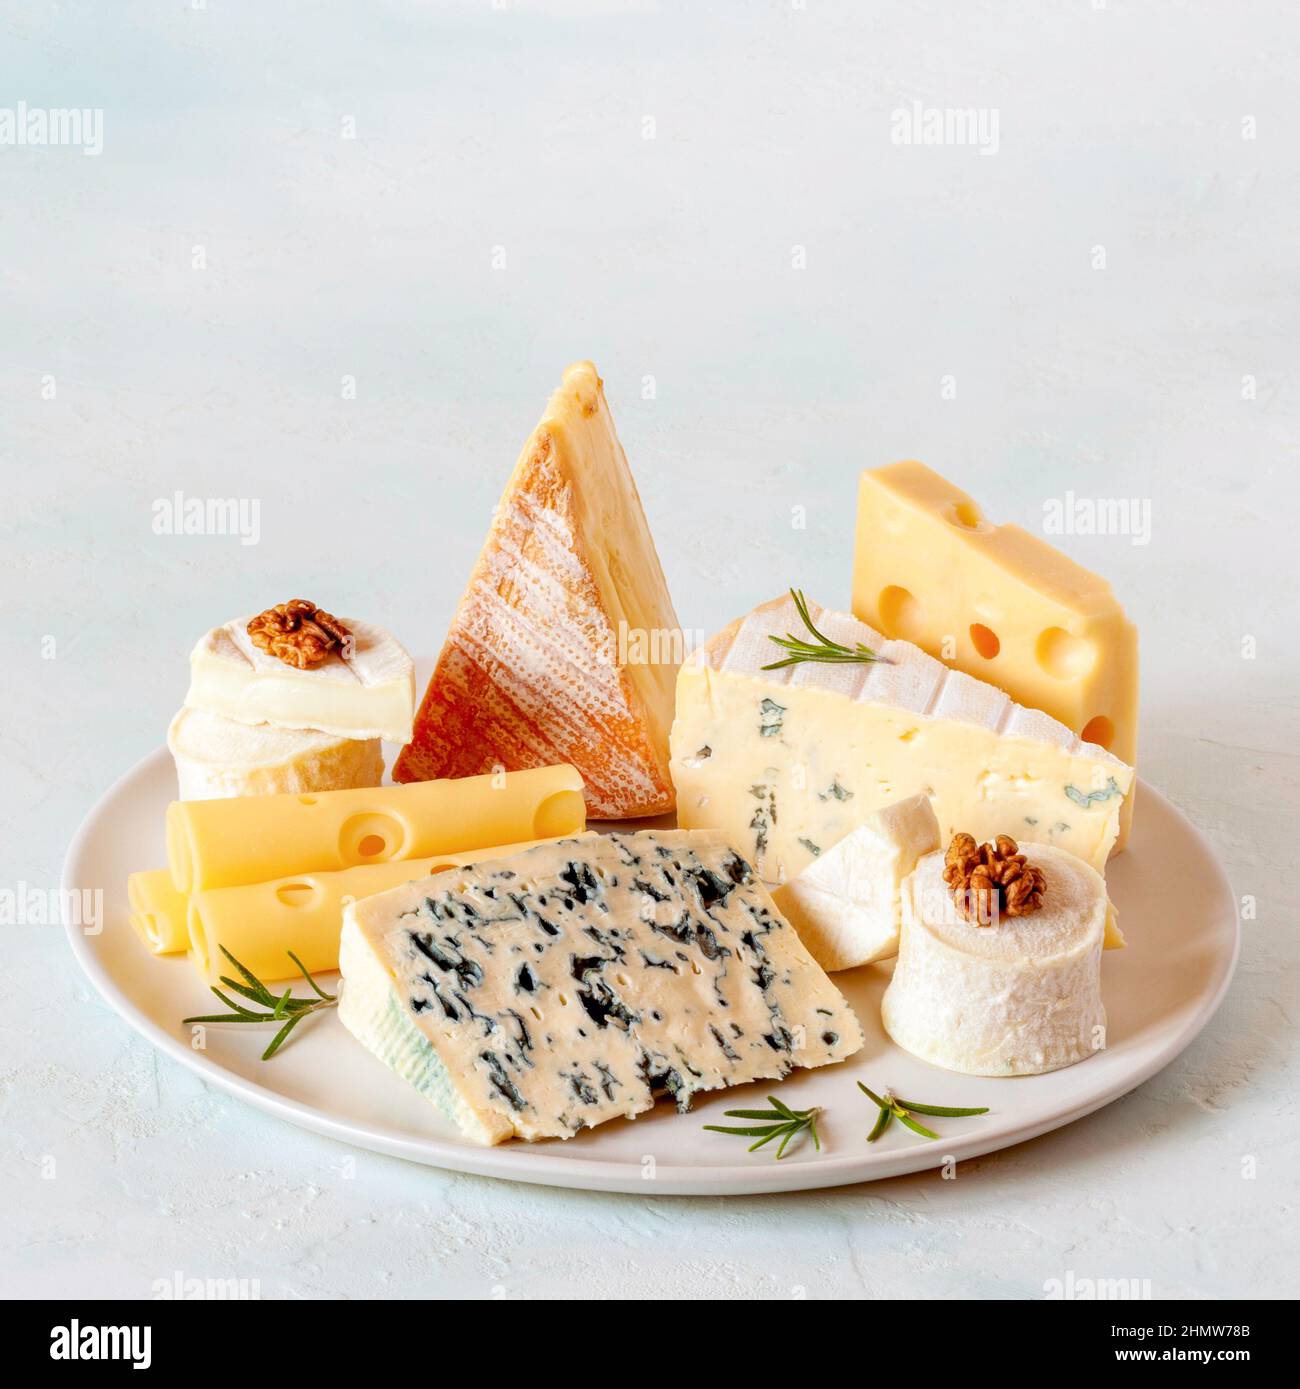 Cheese plate with different types of french cheese Stock Photo